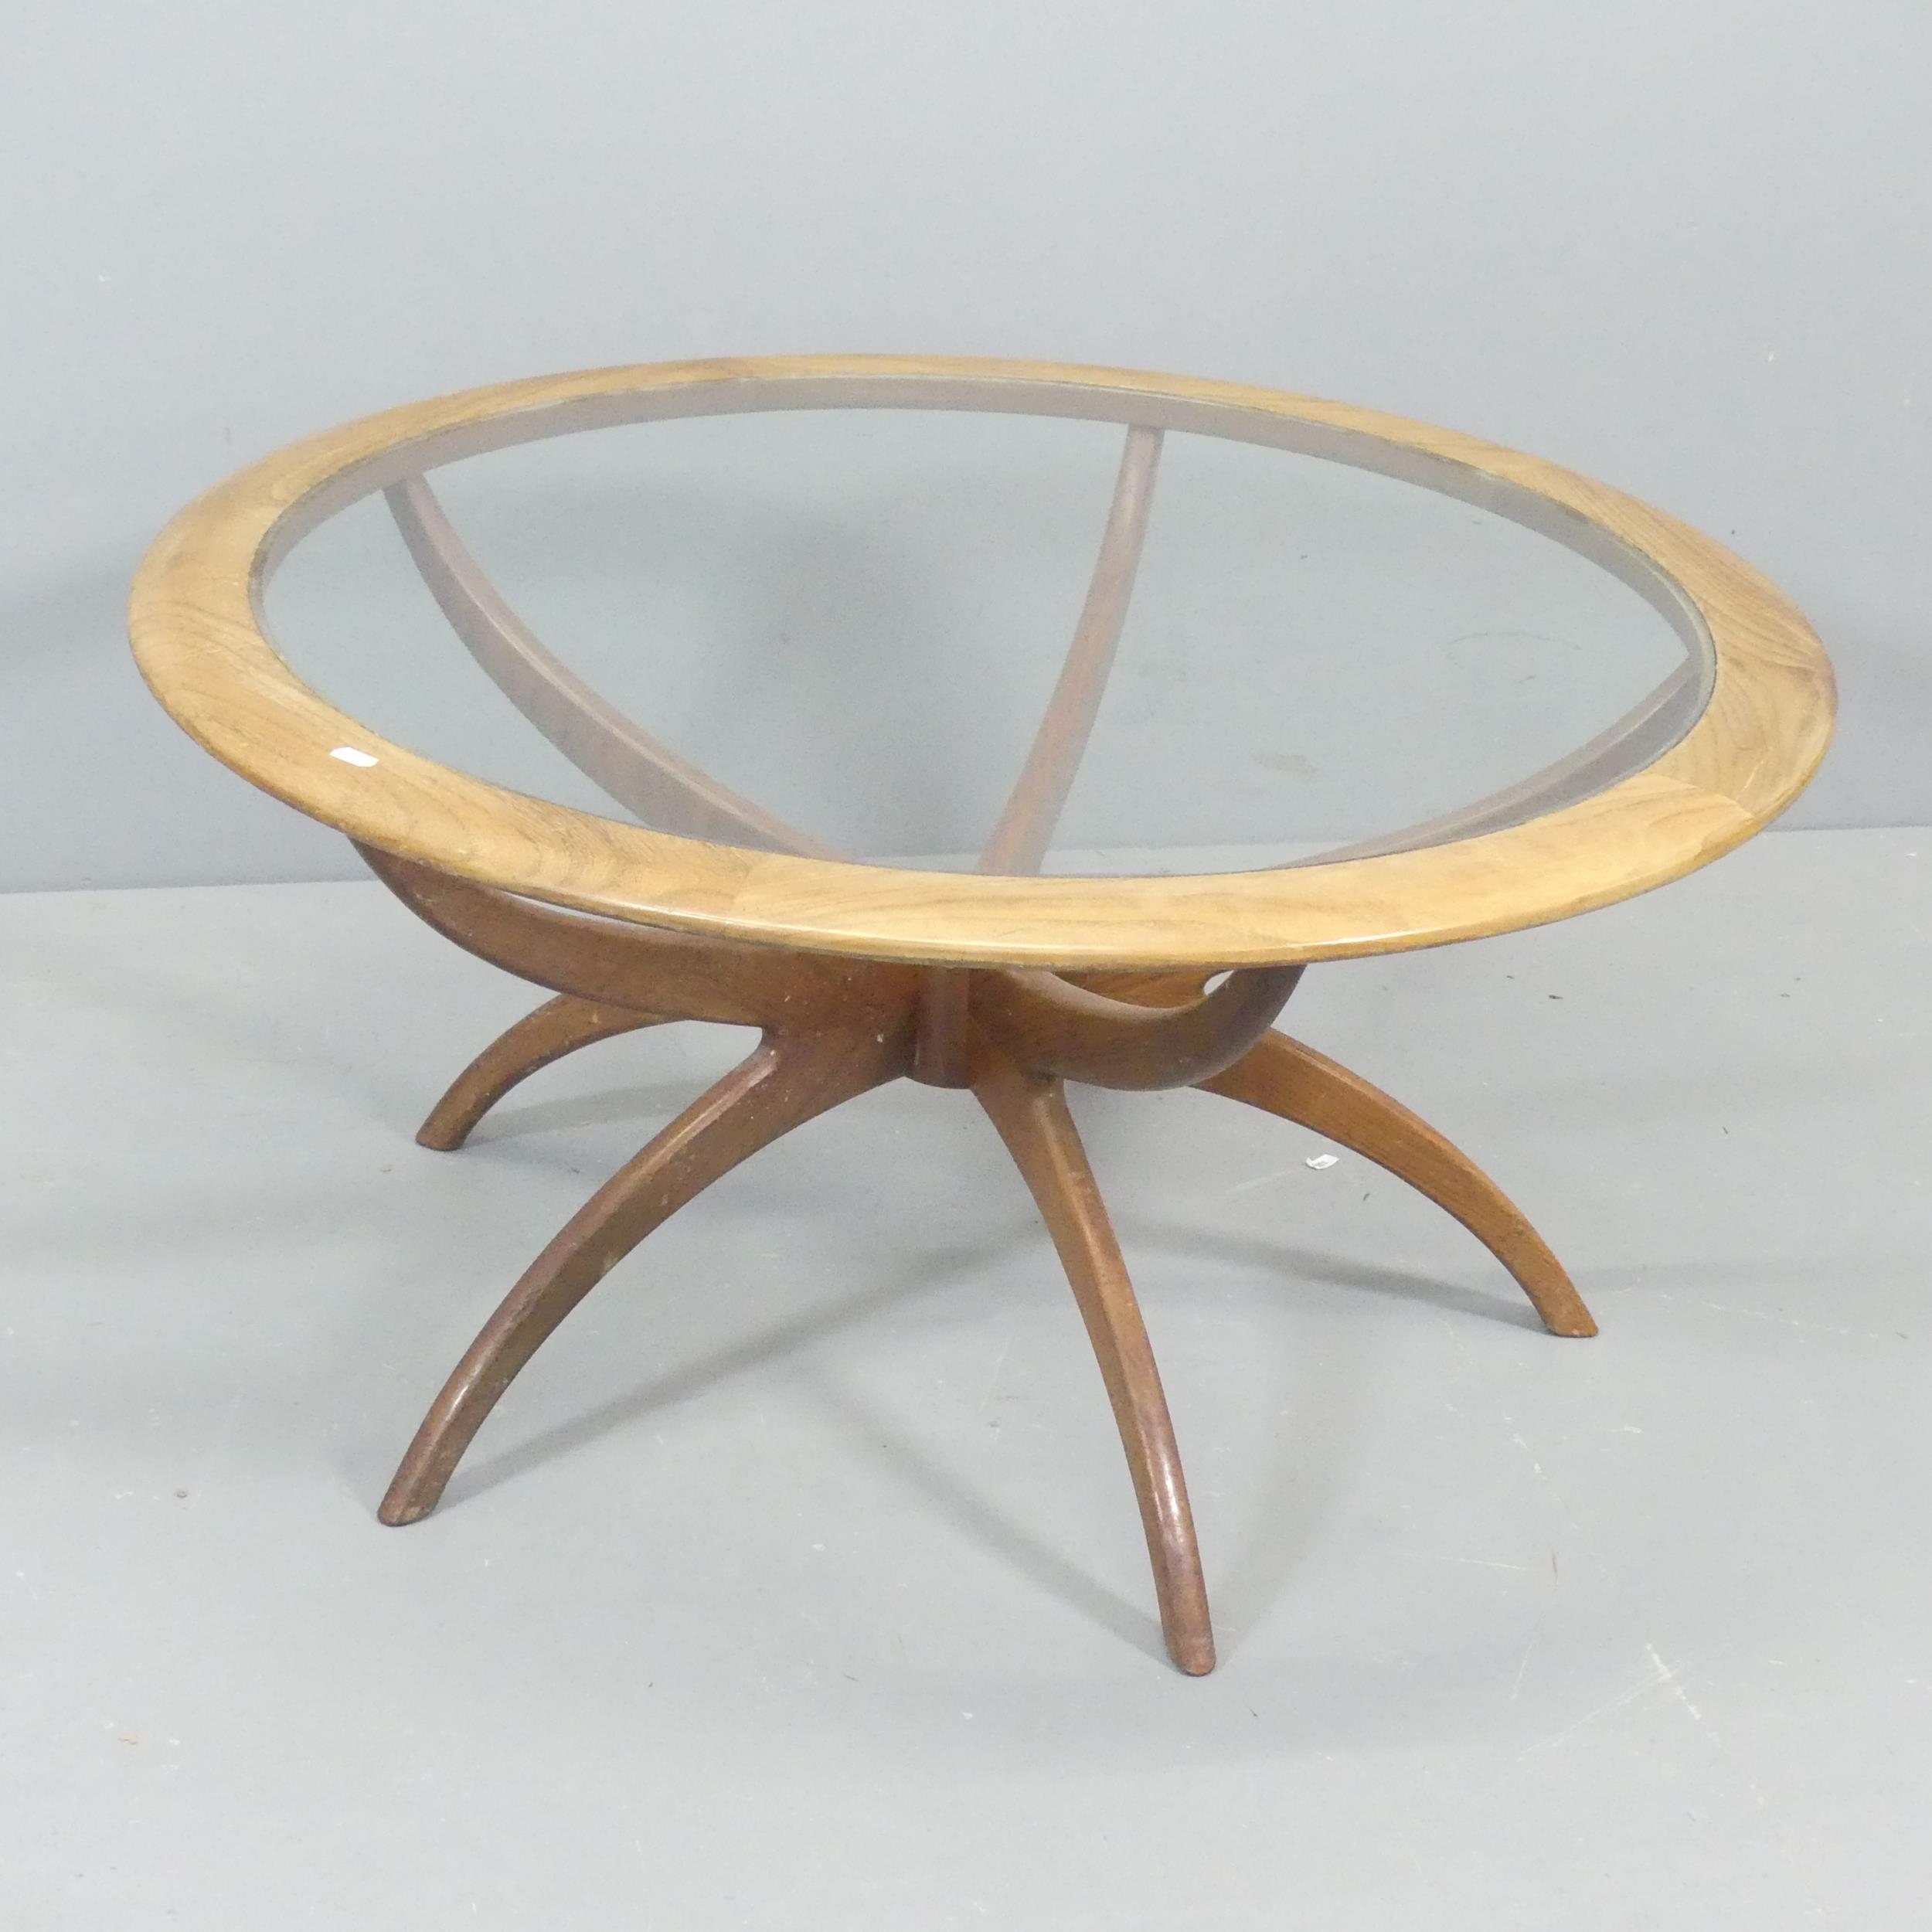 G-PLAN - A mid-century Astro Spider circular coffee table, with inset glass top and teak frame.